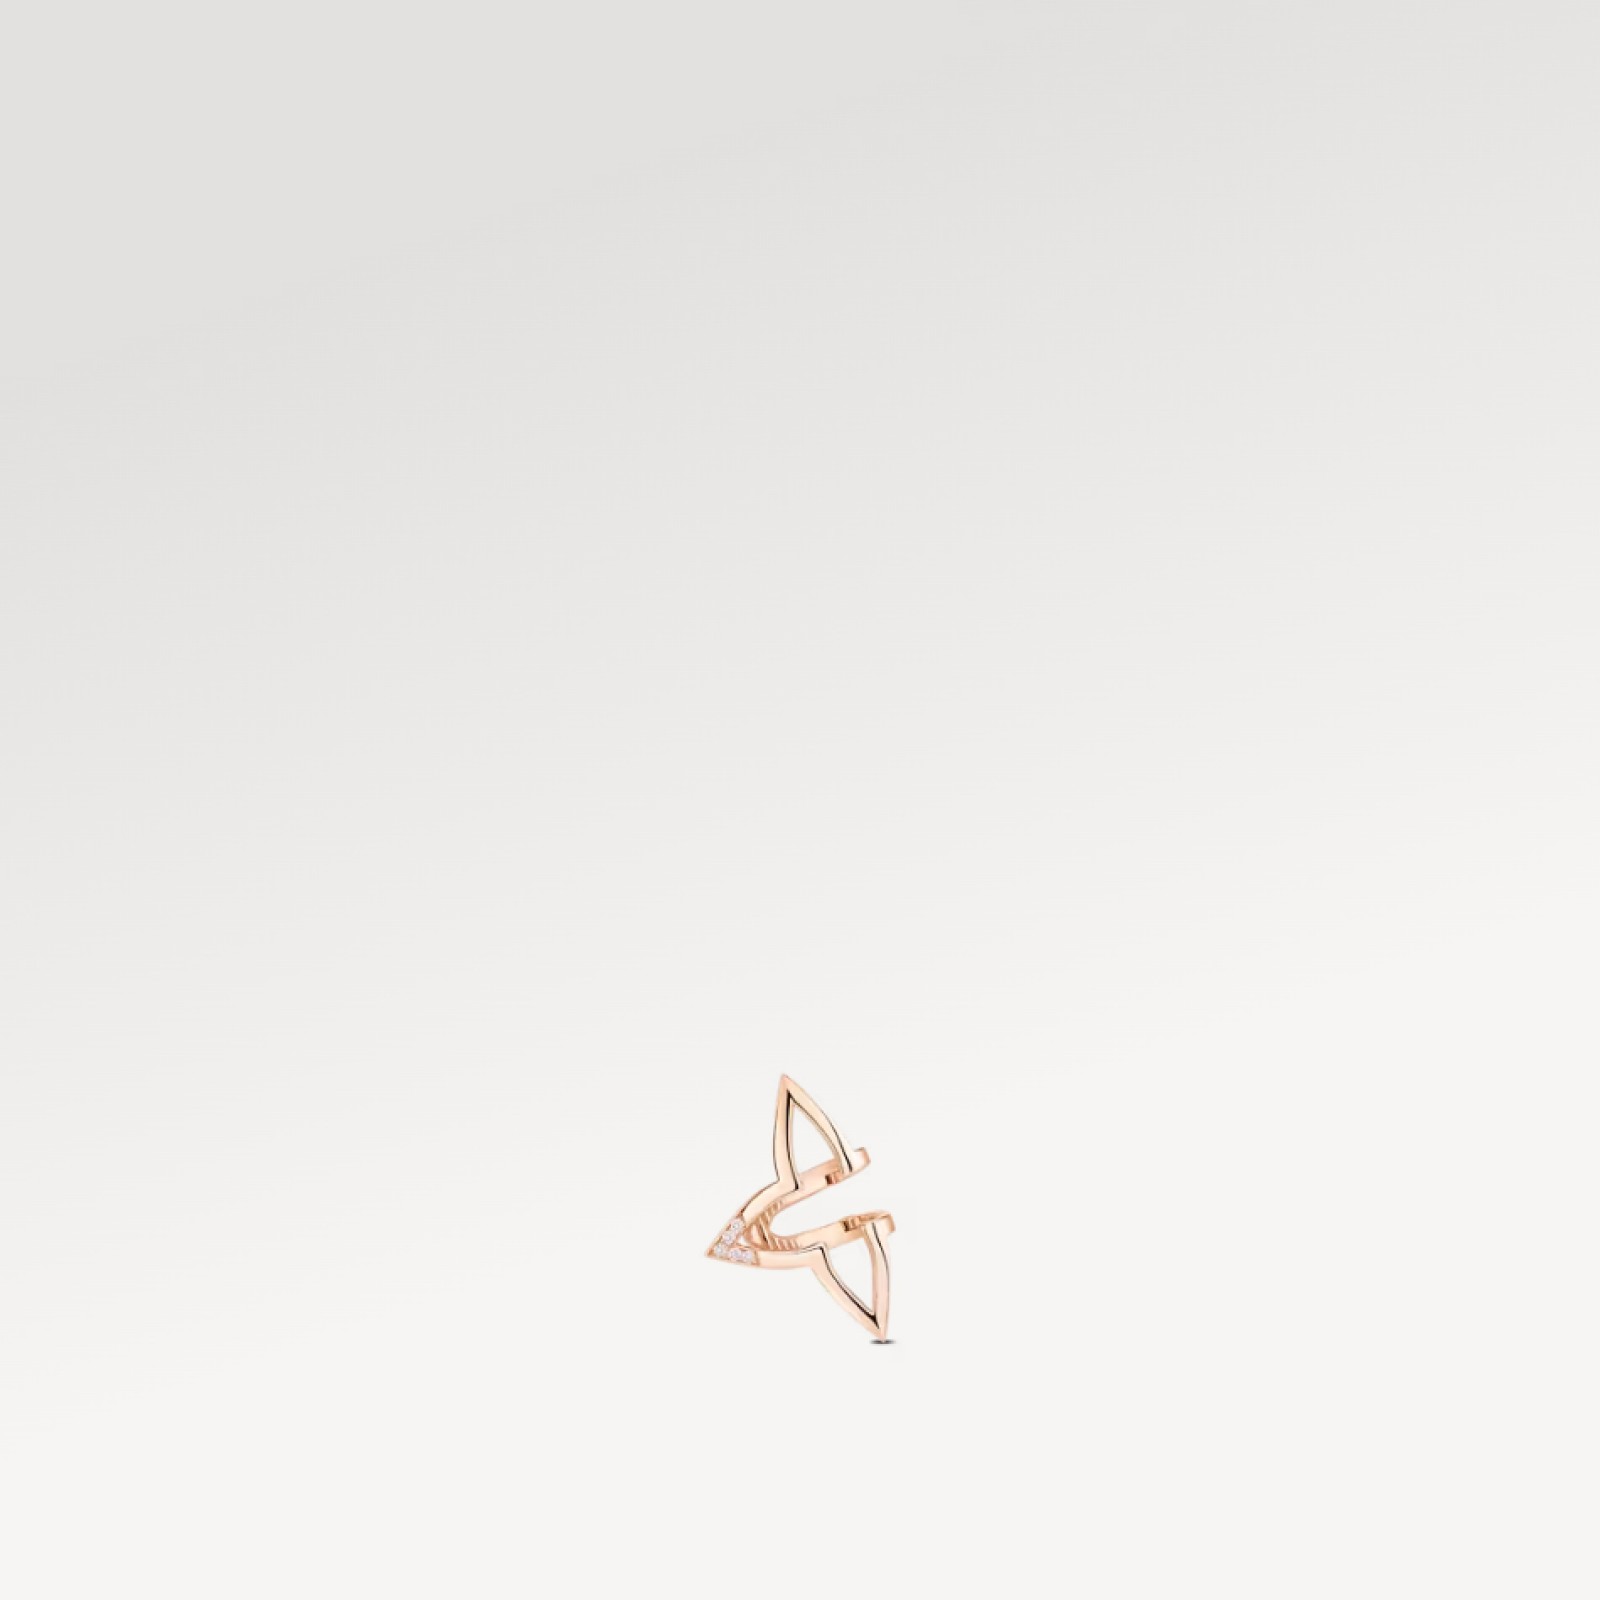 Louis Vuitton Blossom Earcuff, Pink Gold and Diamonds